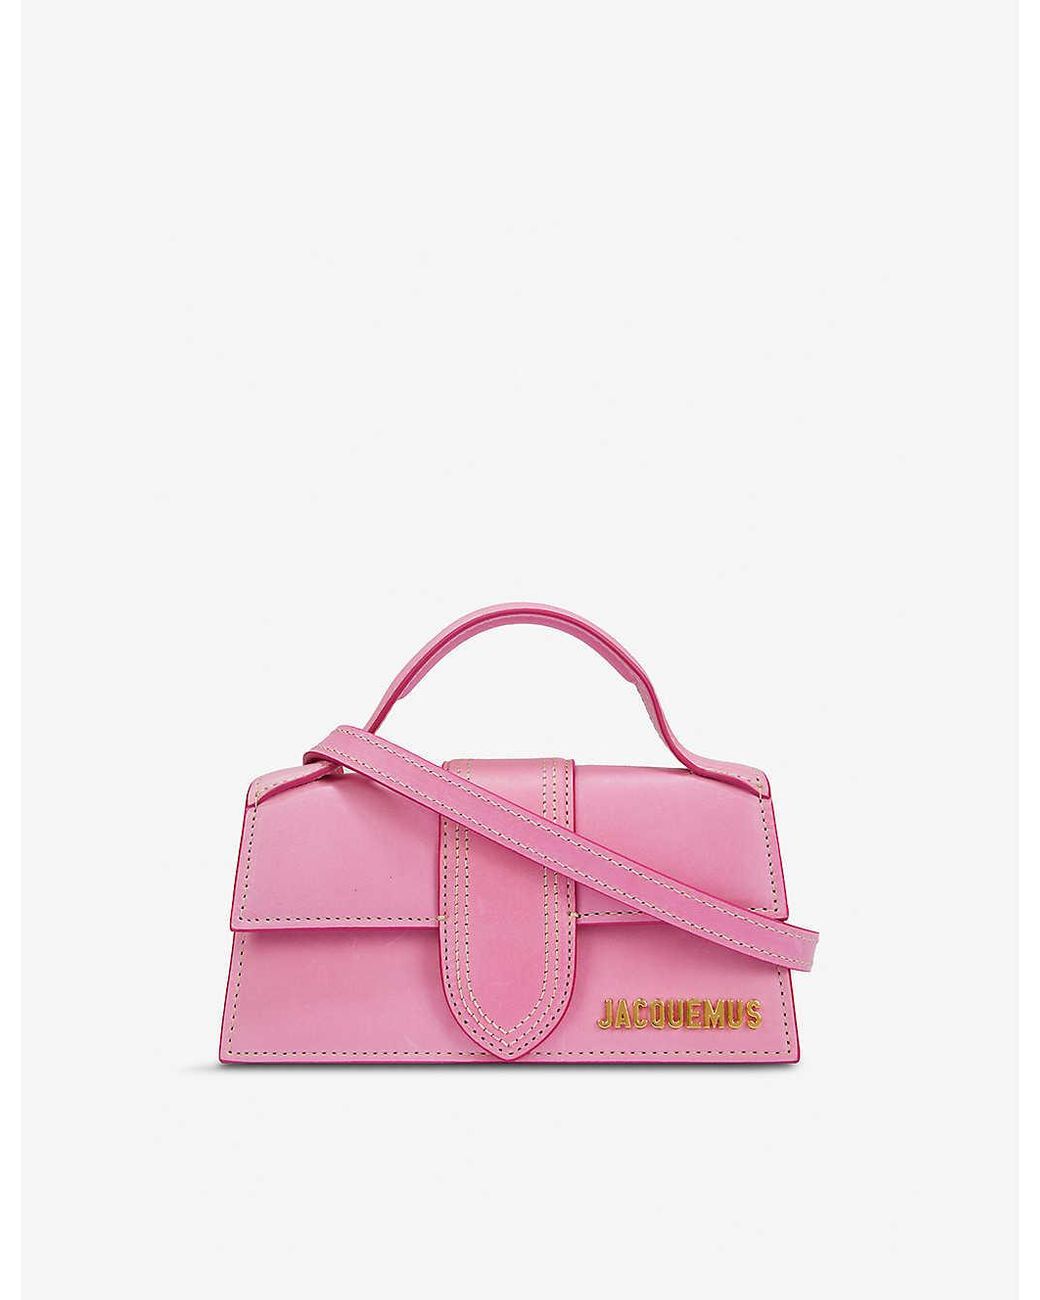 Jacquemus Le Bambino Suede Top Handle Bag in Pink - Lyst